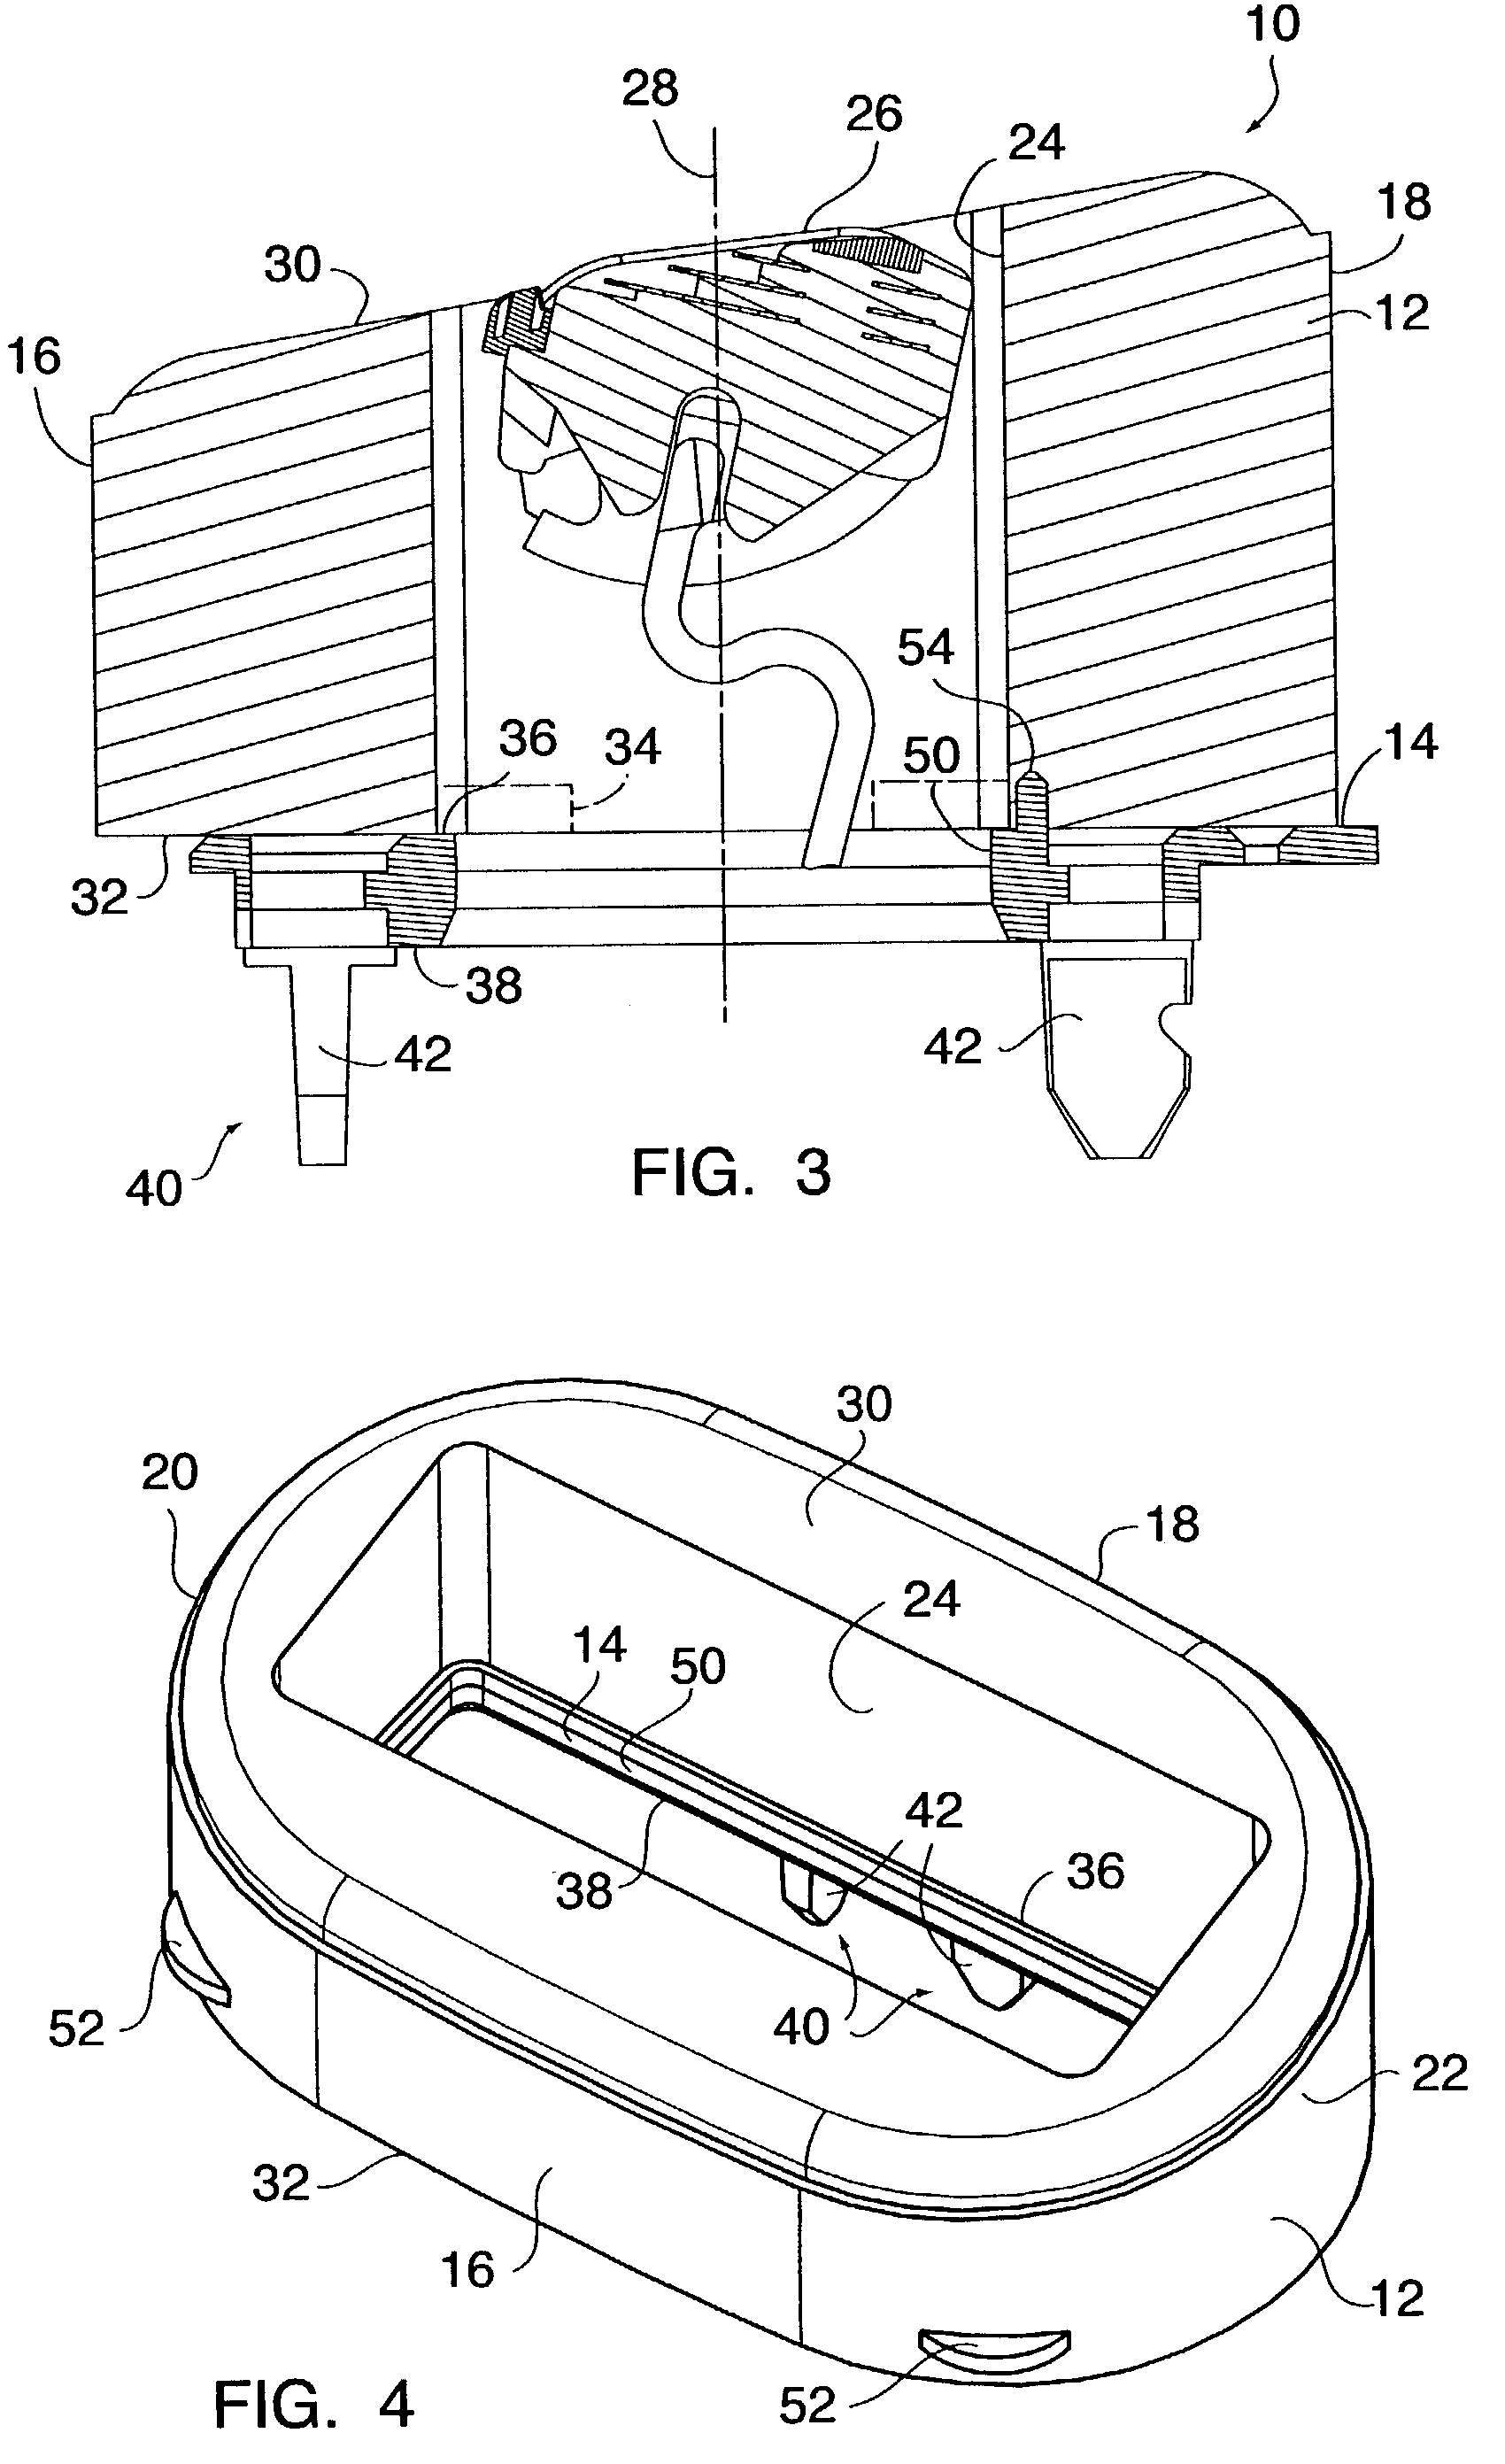 Replacement cartridge for a razor assembly